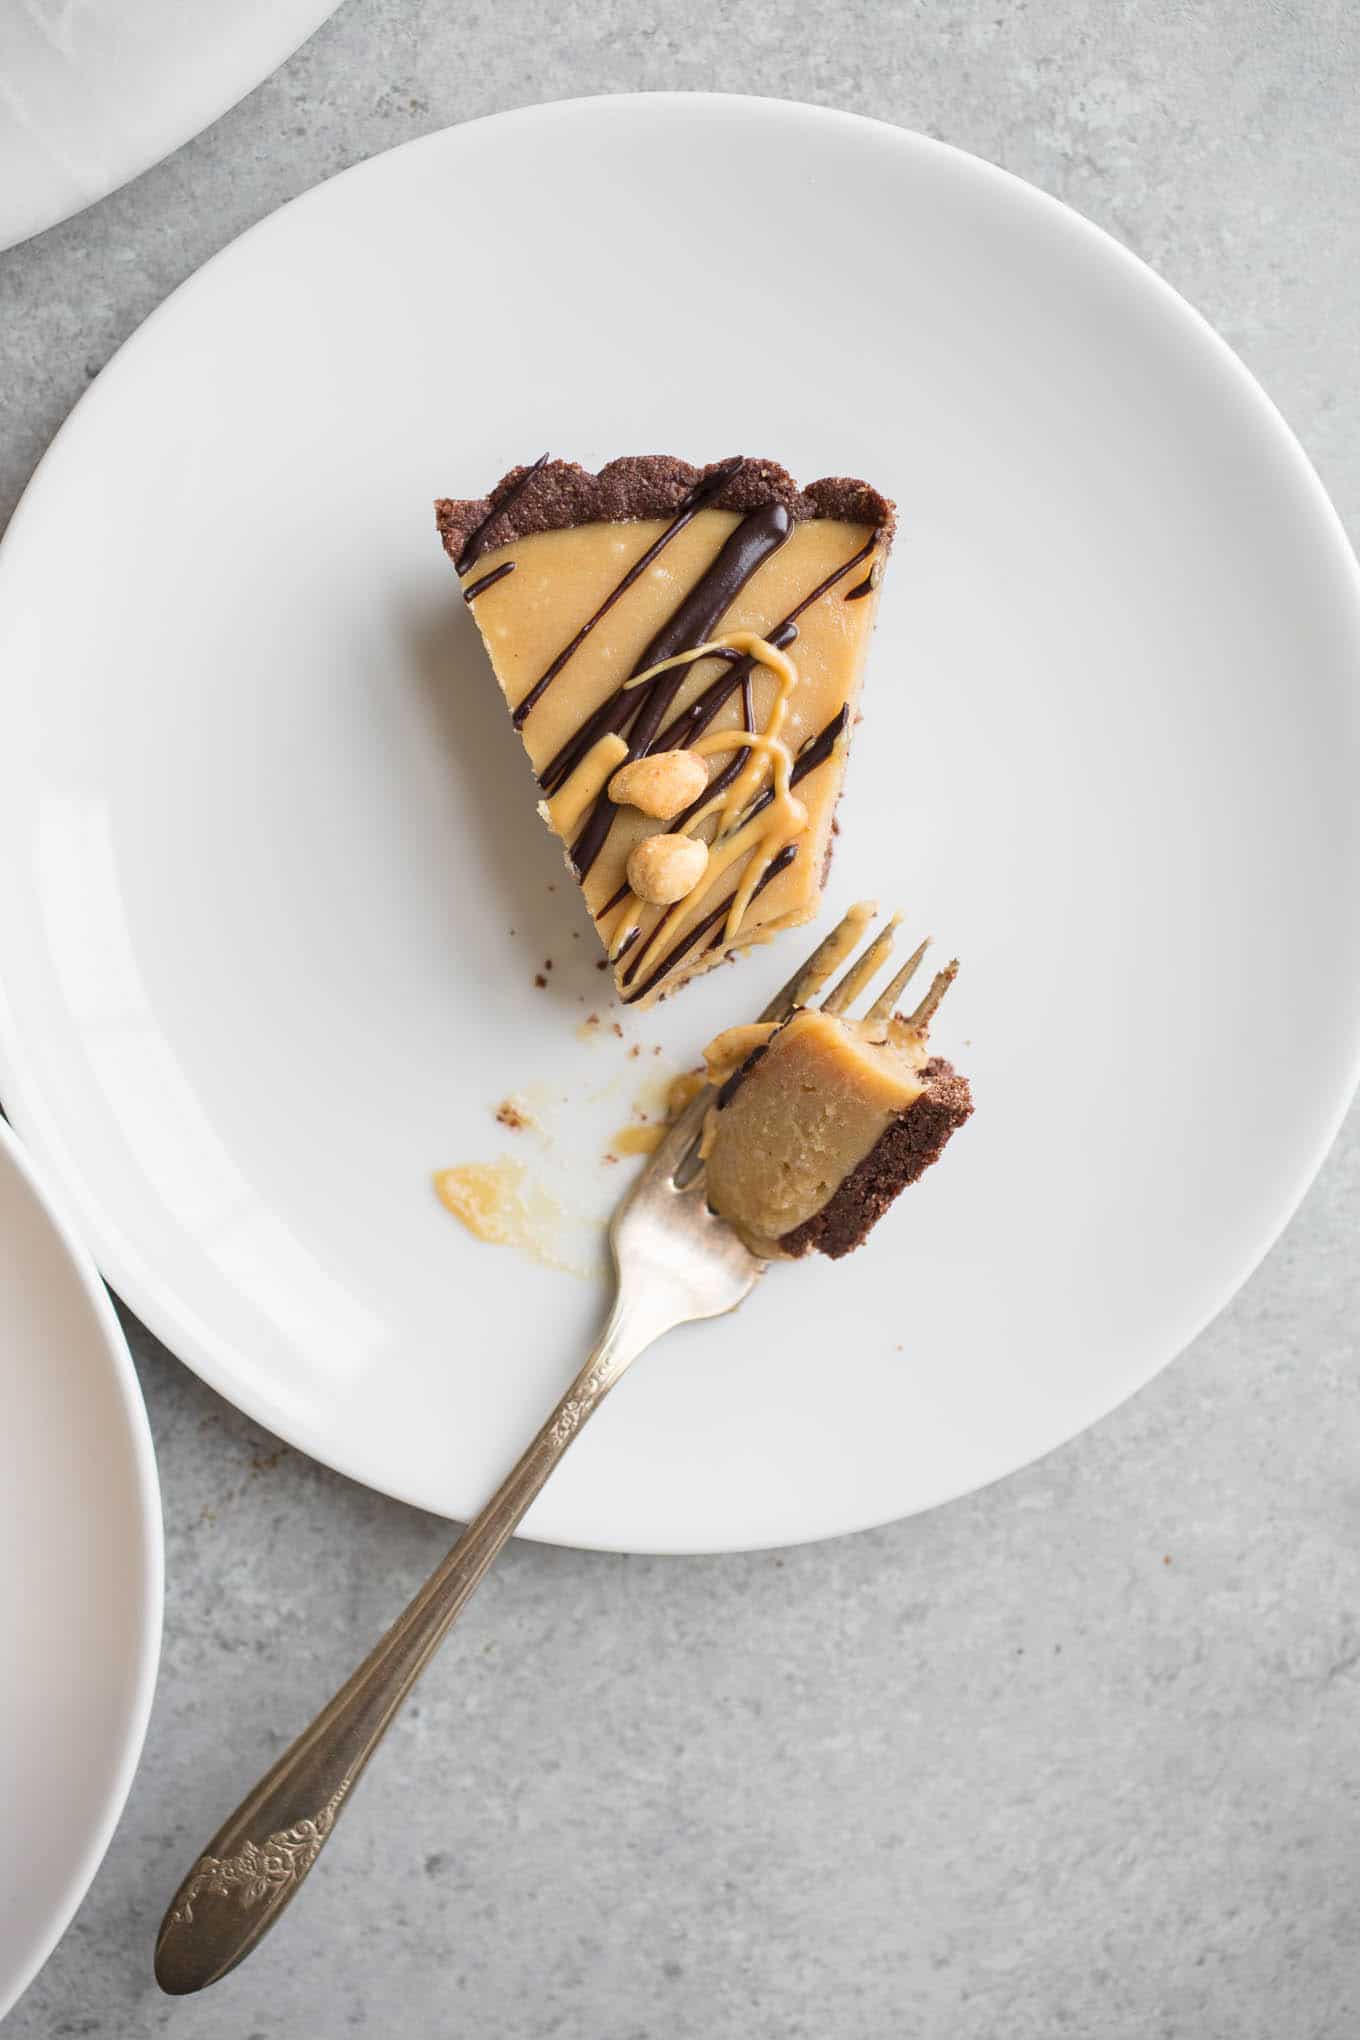 Vegan Peanut Butter Pie made with all-natural peanut butter, coconut milk, and maple syrup in a chocolate almond flour crust. A gluten-free frozen dessert recipe without refined sugar.